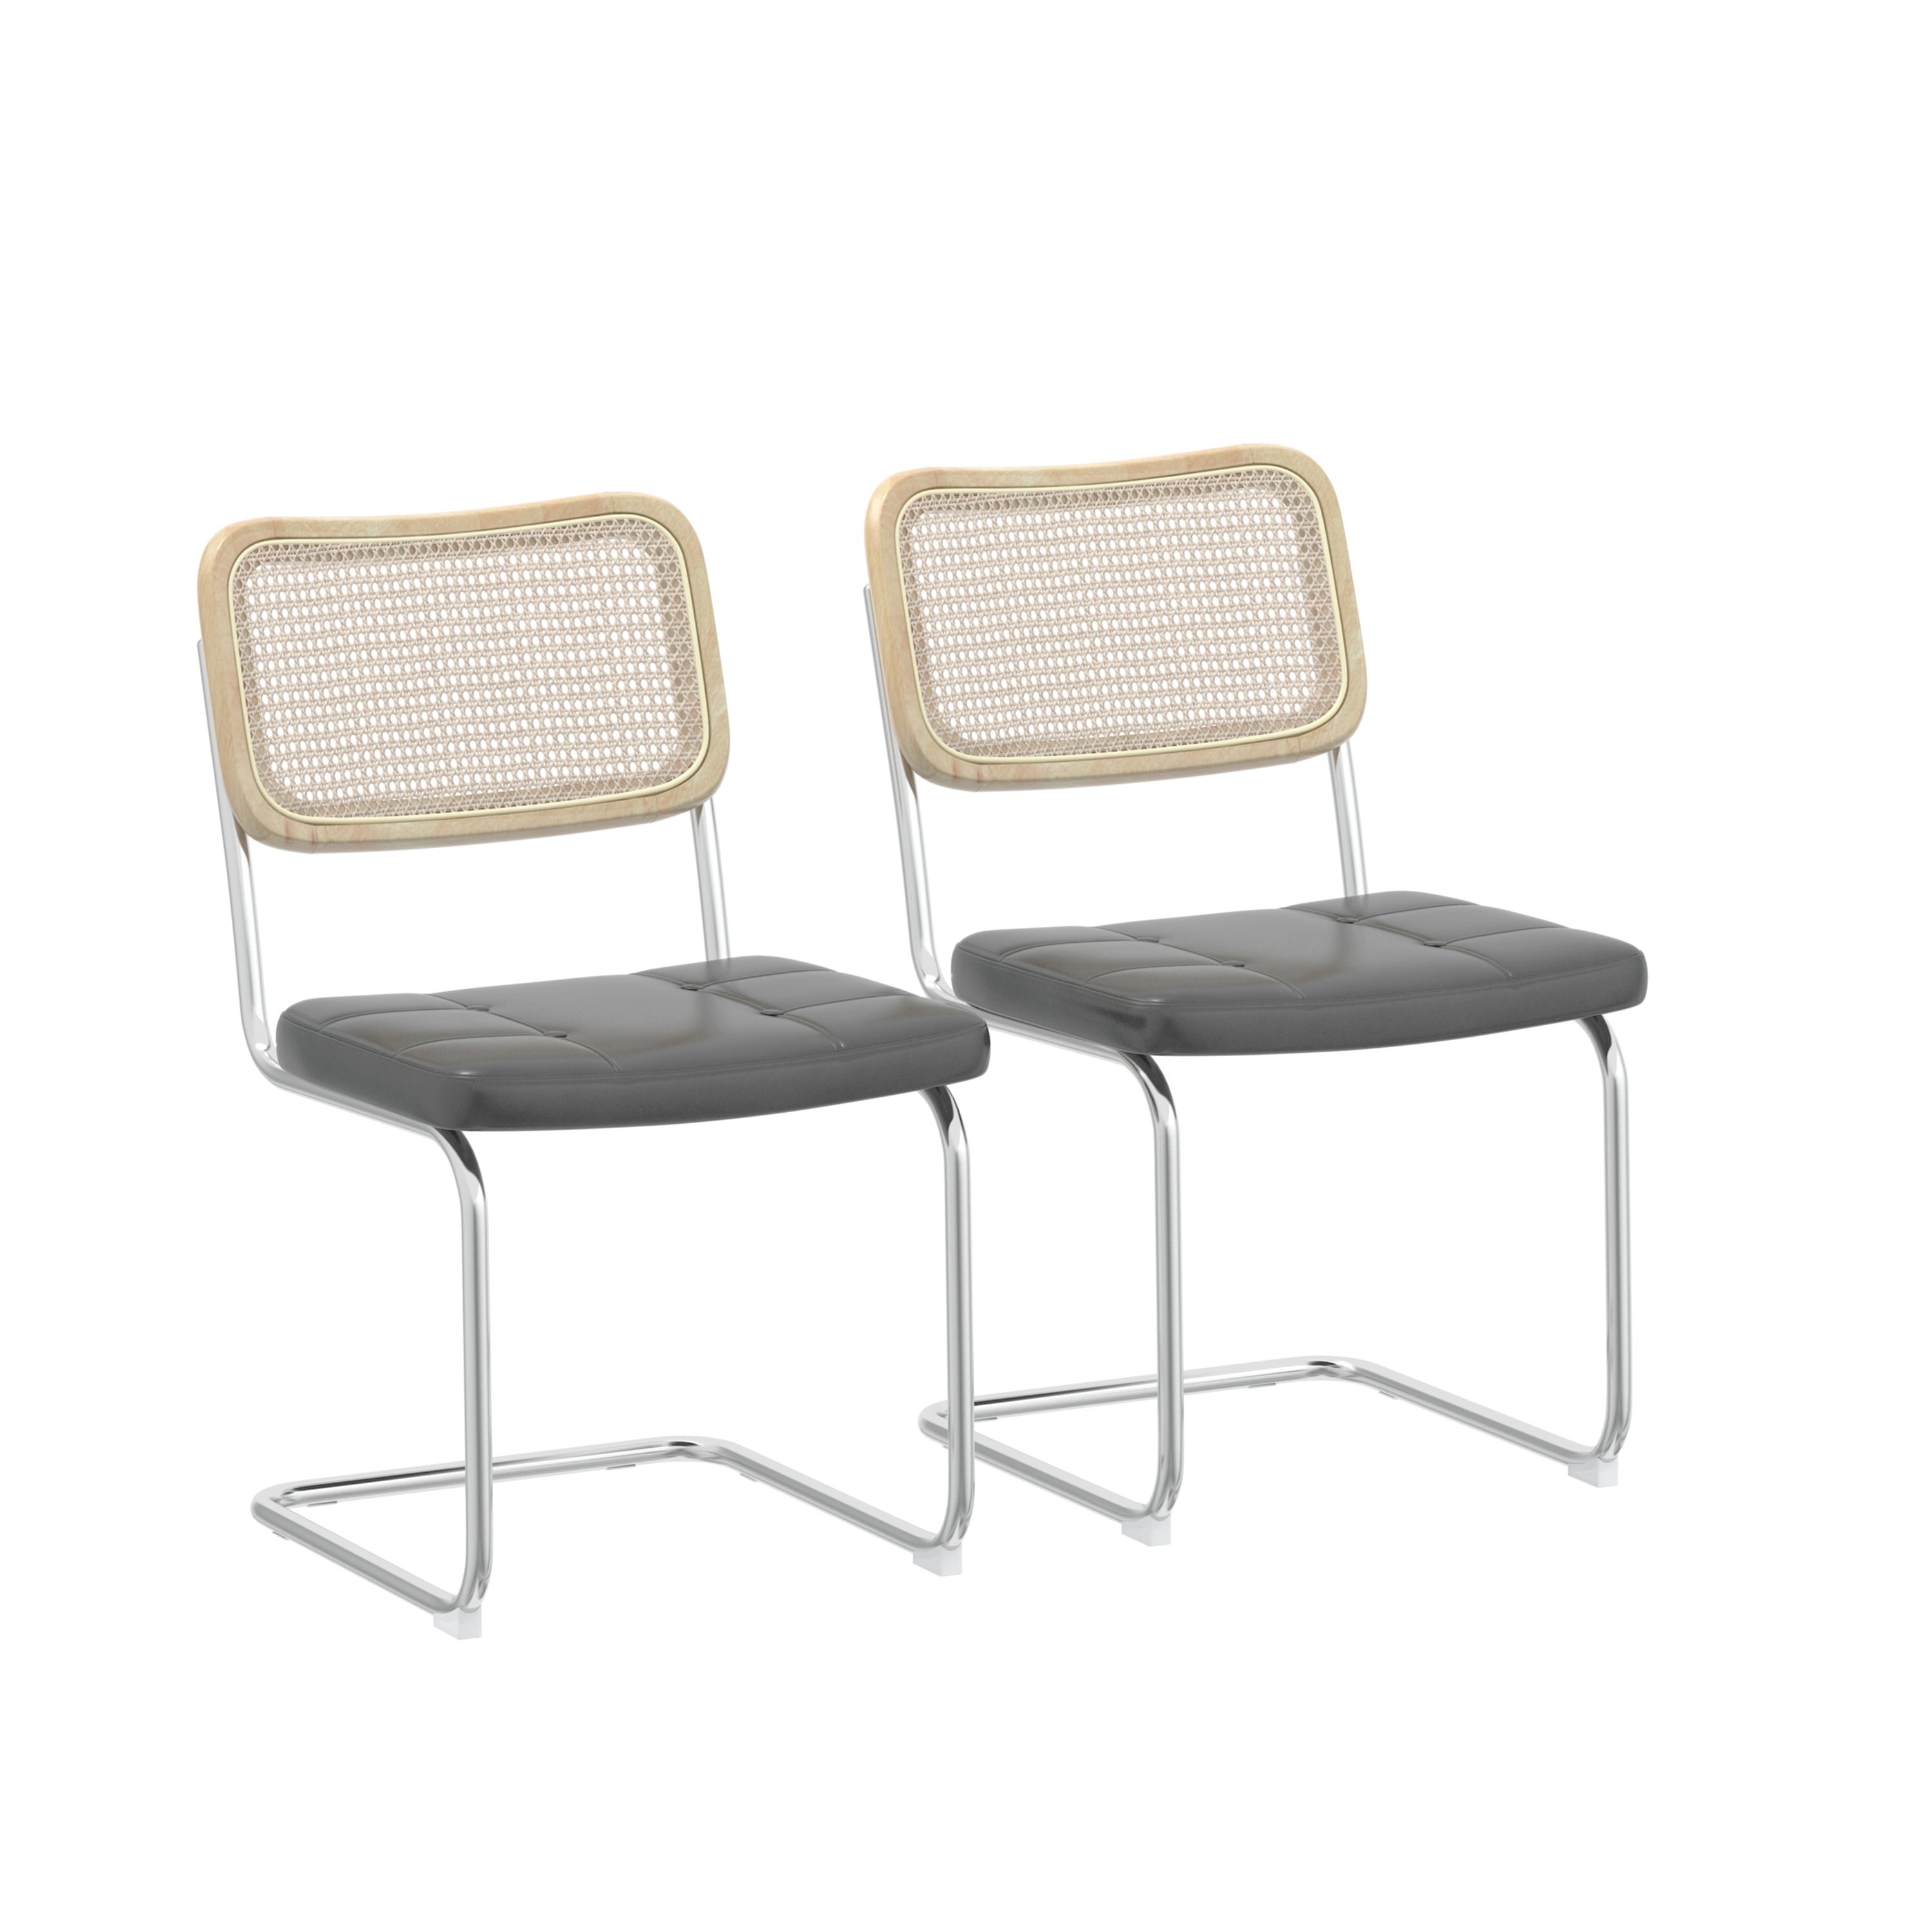 Leather Rattan Dining Chair with High-Density Sponge (Set of 2) - Grey